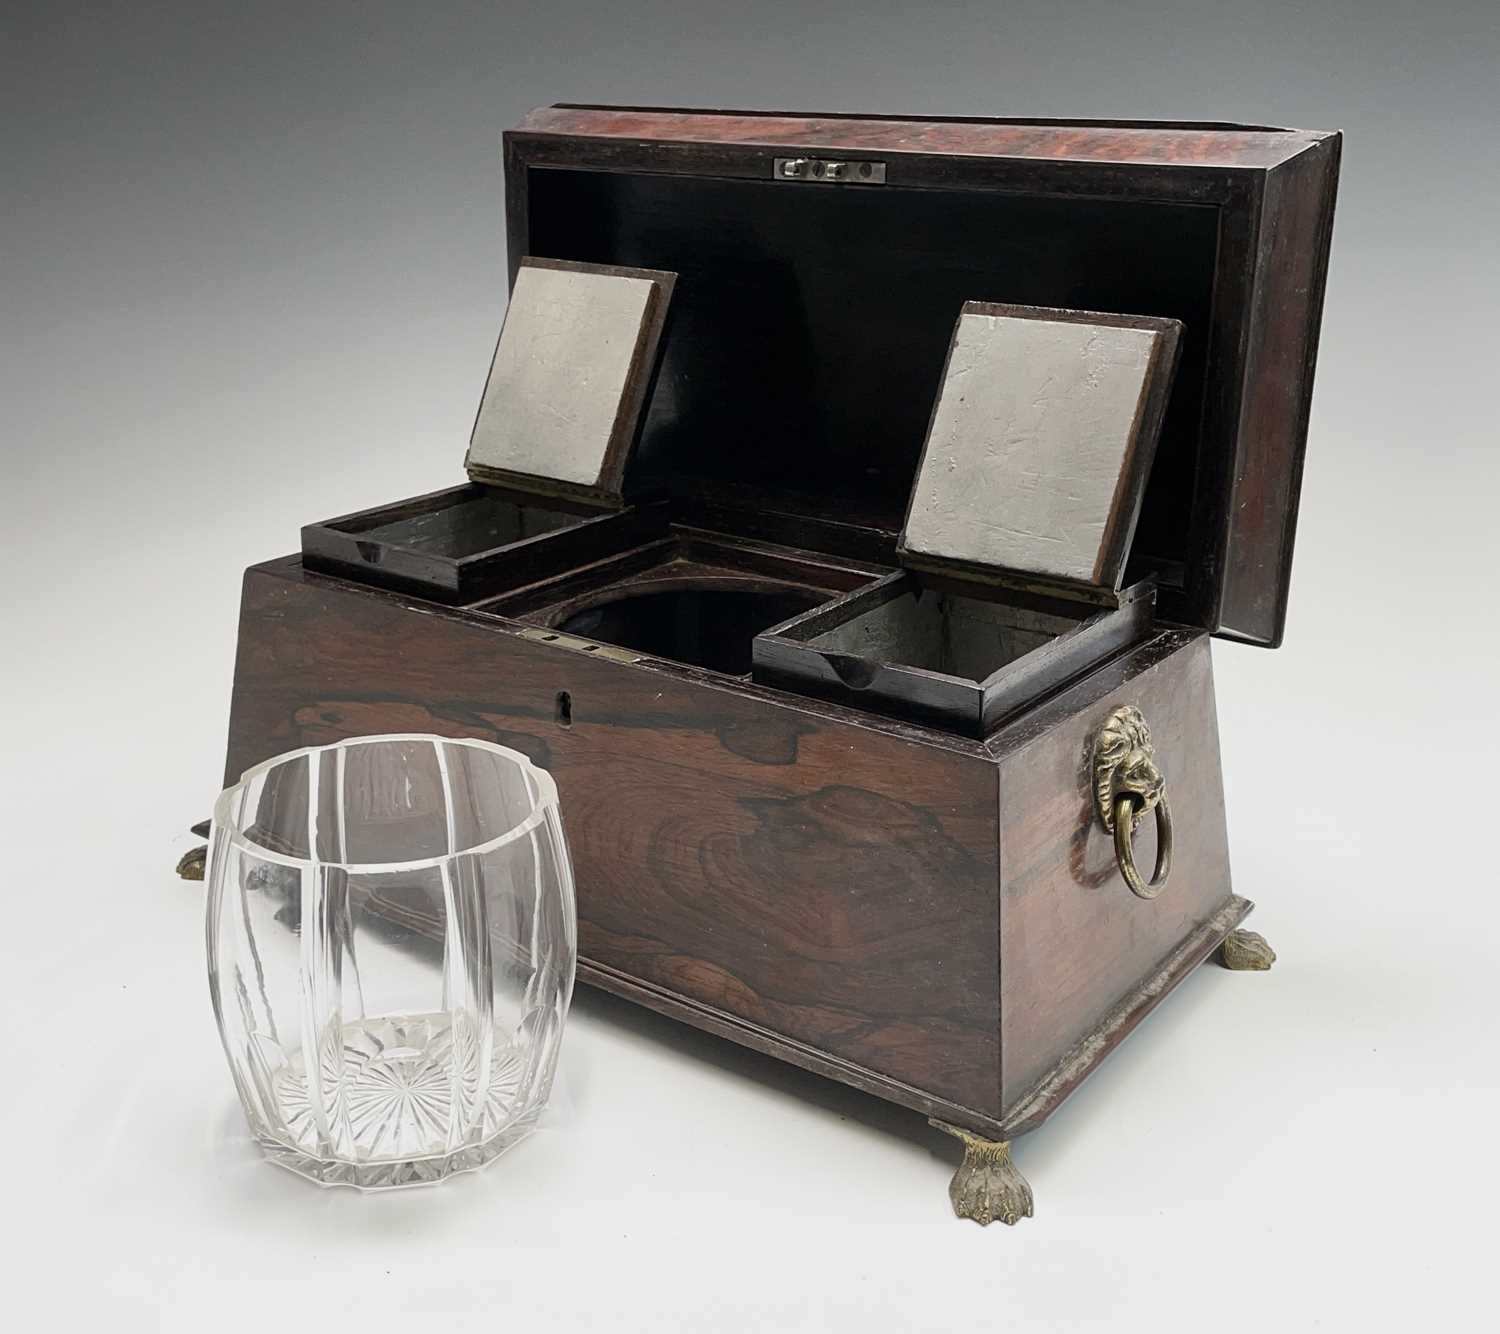 A Regency rosewood tea caddy, of sarcophagus shape, with a glass mixing bowl and two lidded - Image 4 of 9